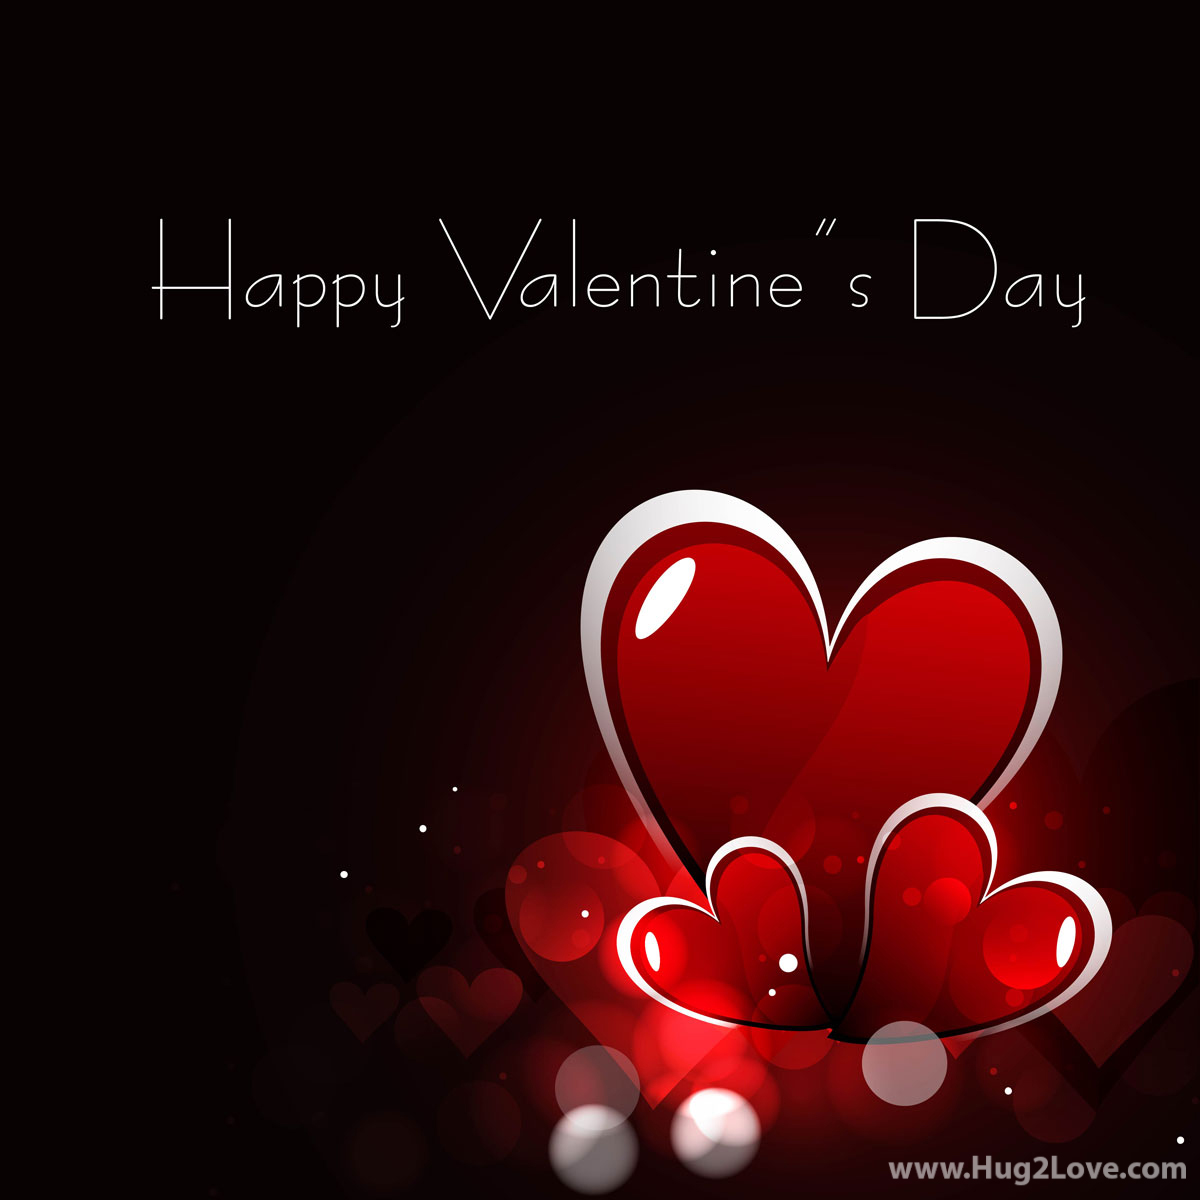 Top 100 Happy Valentine’s Day Images & Wallpapers 2017